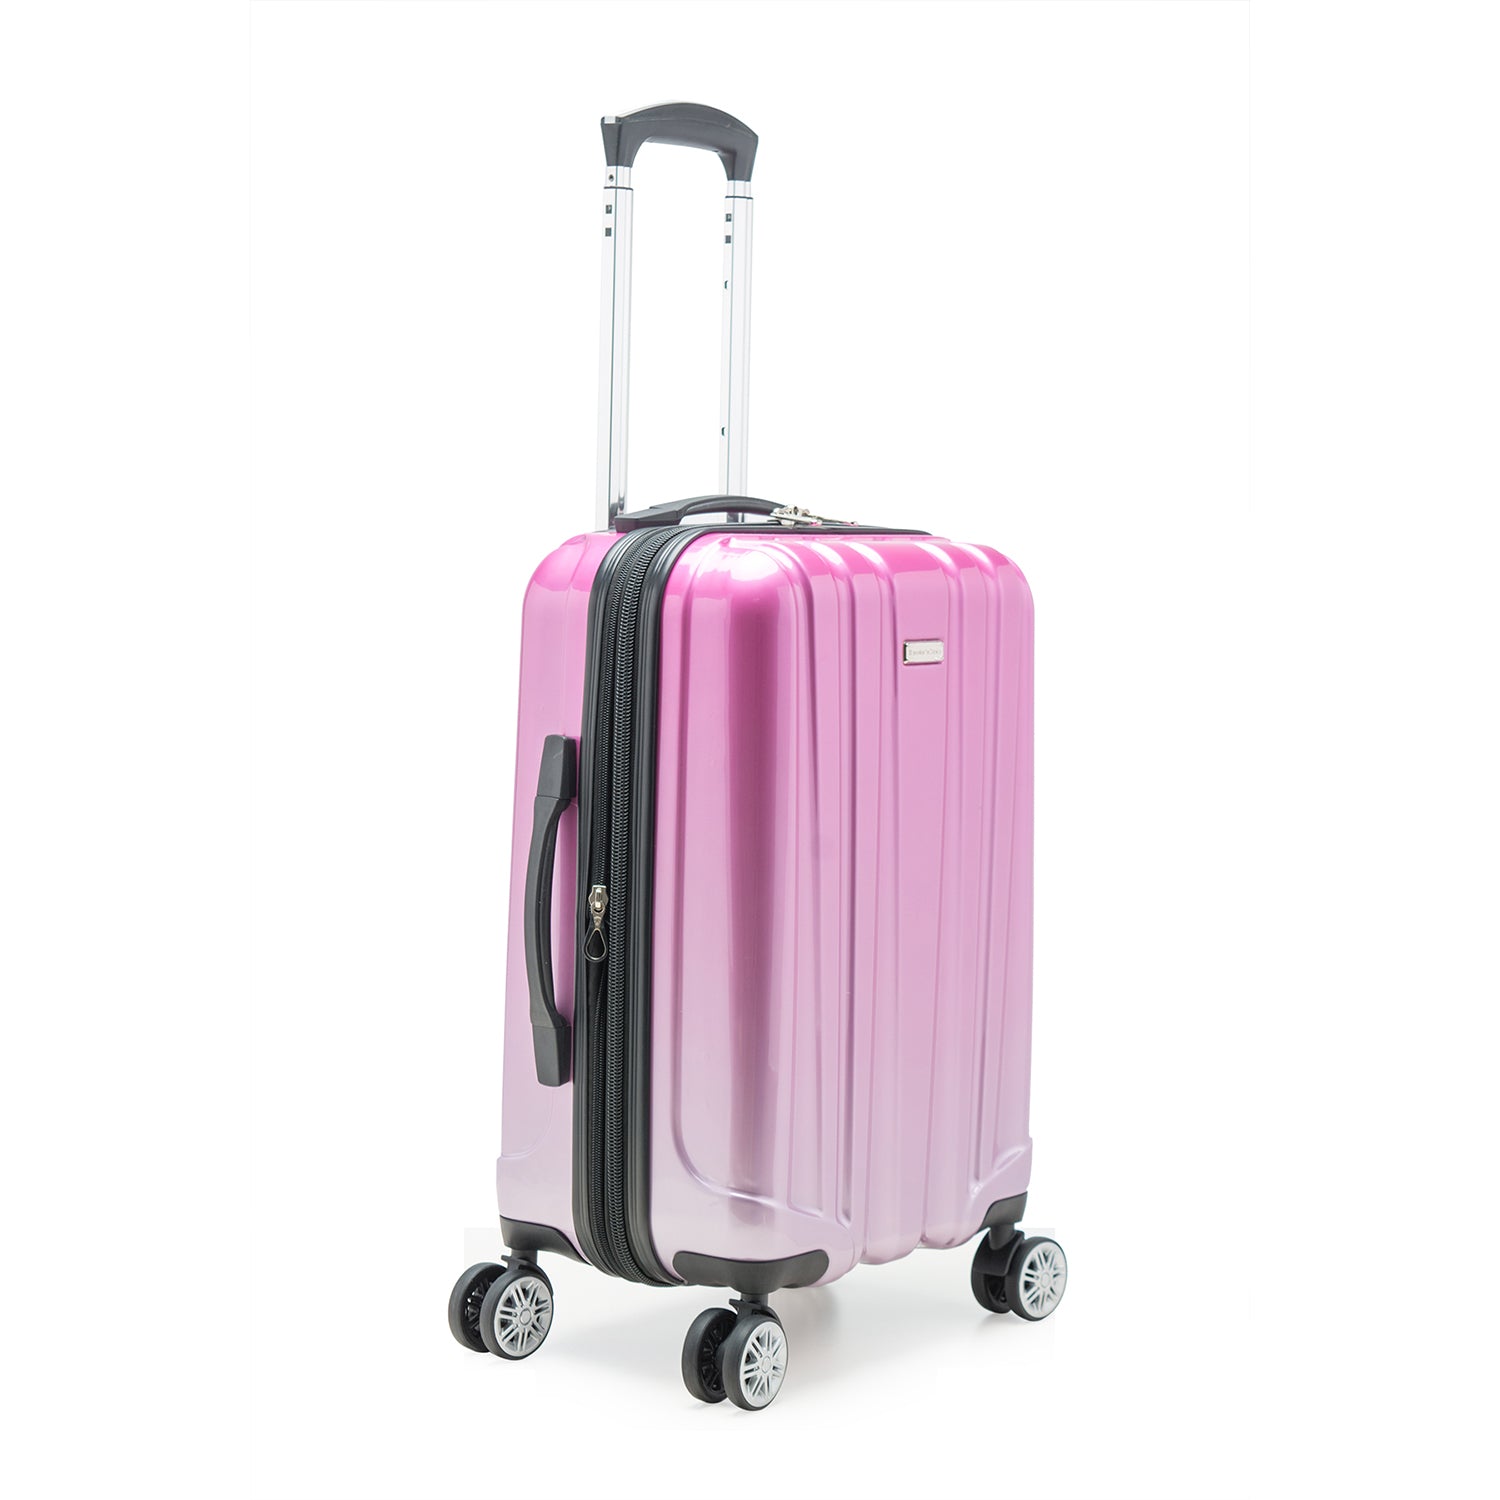 Ruma II Carry-On Spinner | Durable and Fashionable for All Travelers.